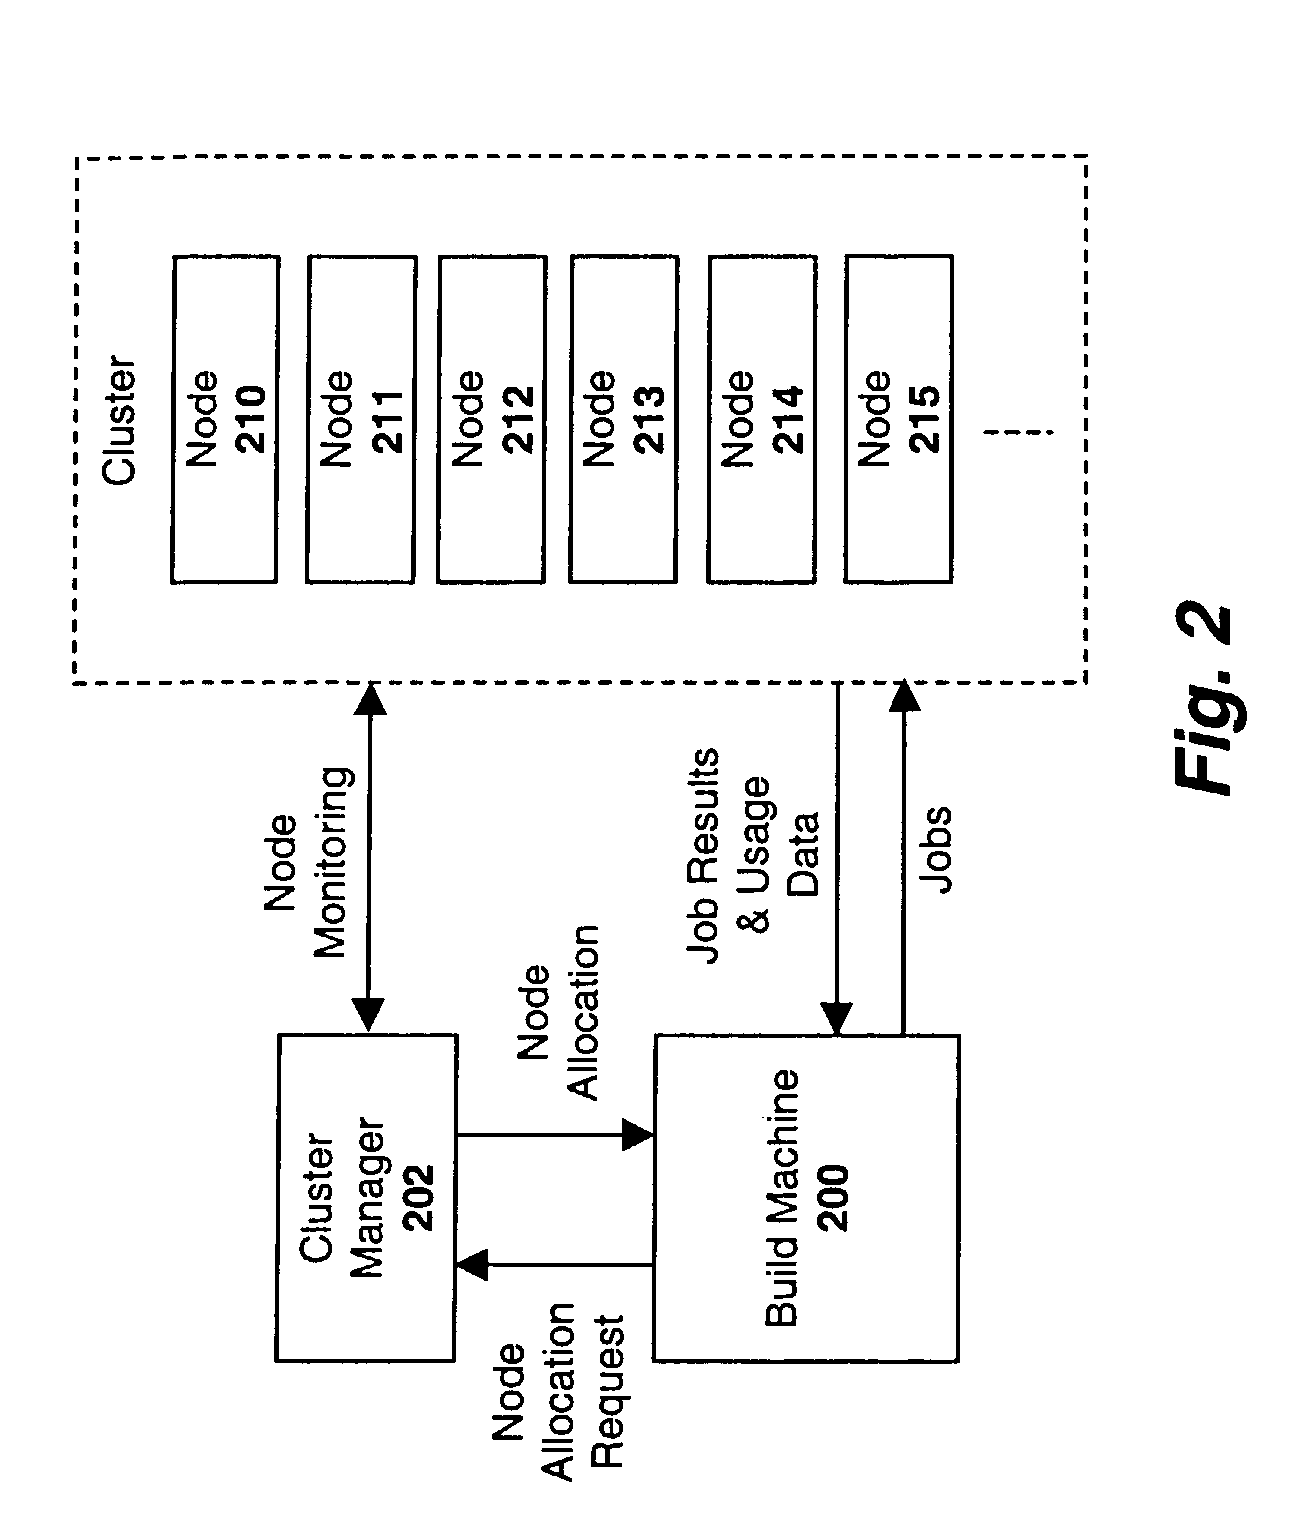 System and method for supplementing program builds with file usage information